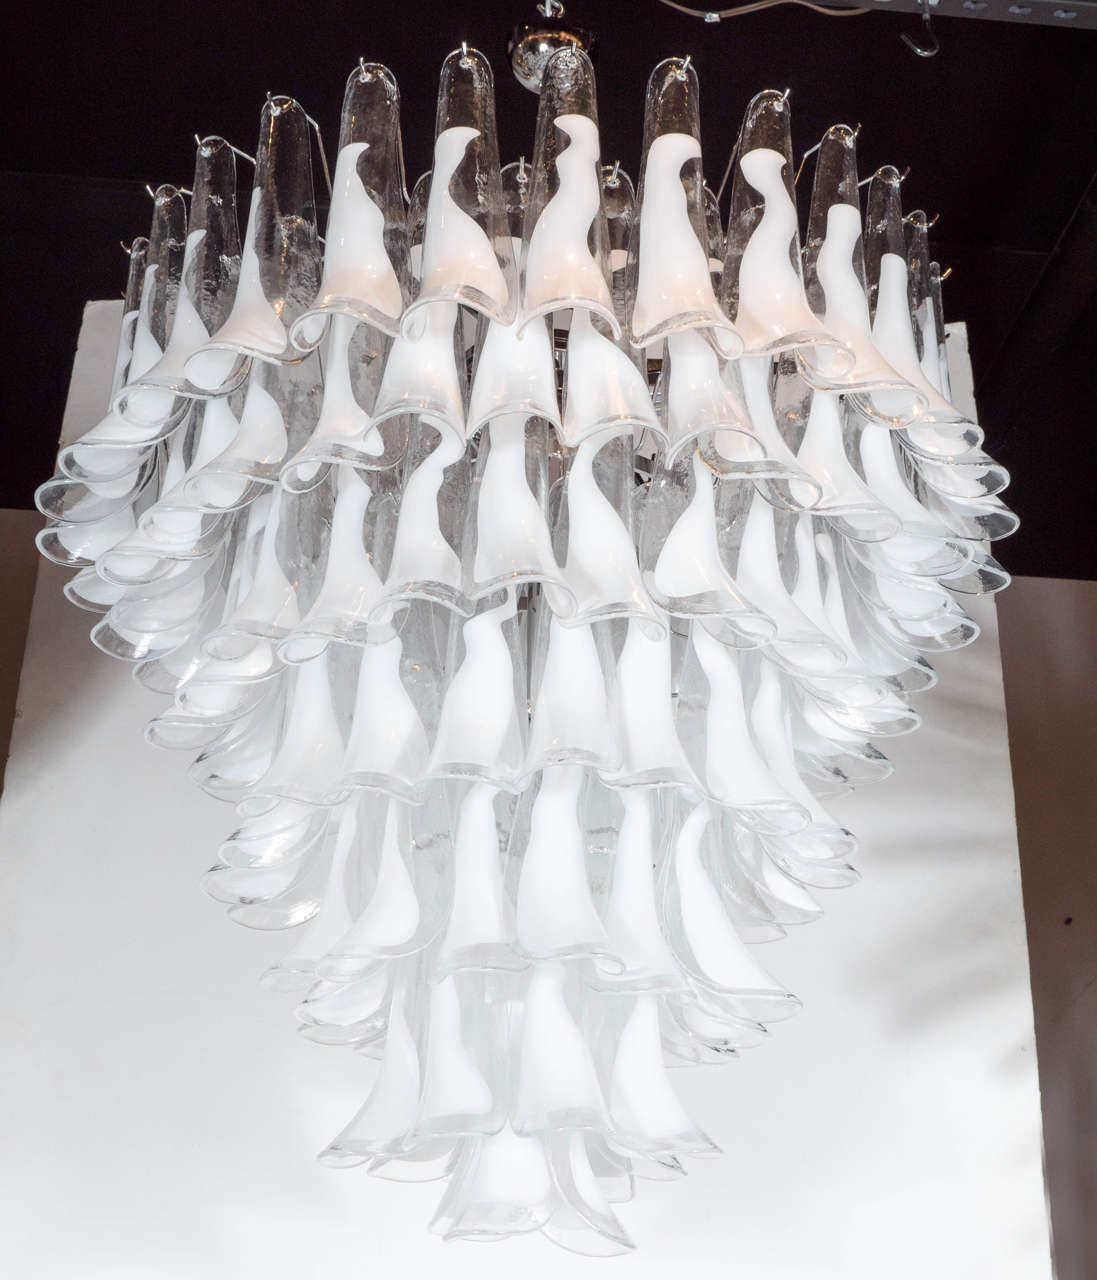 This stunning modernist feather chandelier was hand blown in Murano, Italy- the island off the coast of Venice renowned for centuries for its superlative glass production. Realized in the manner of Vistosi, the chandelier offers seven tiers of hand